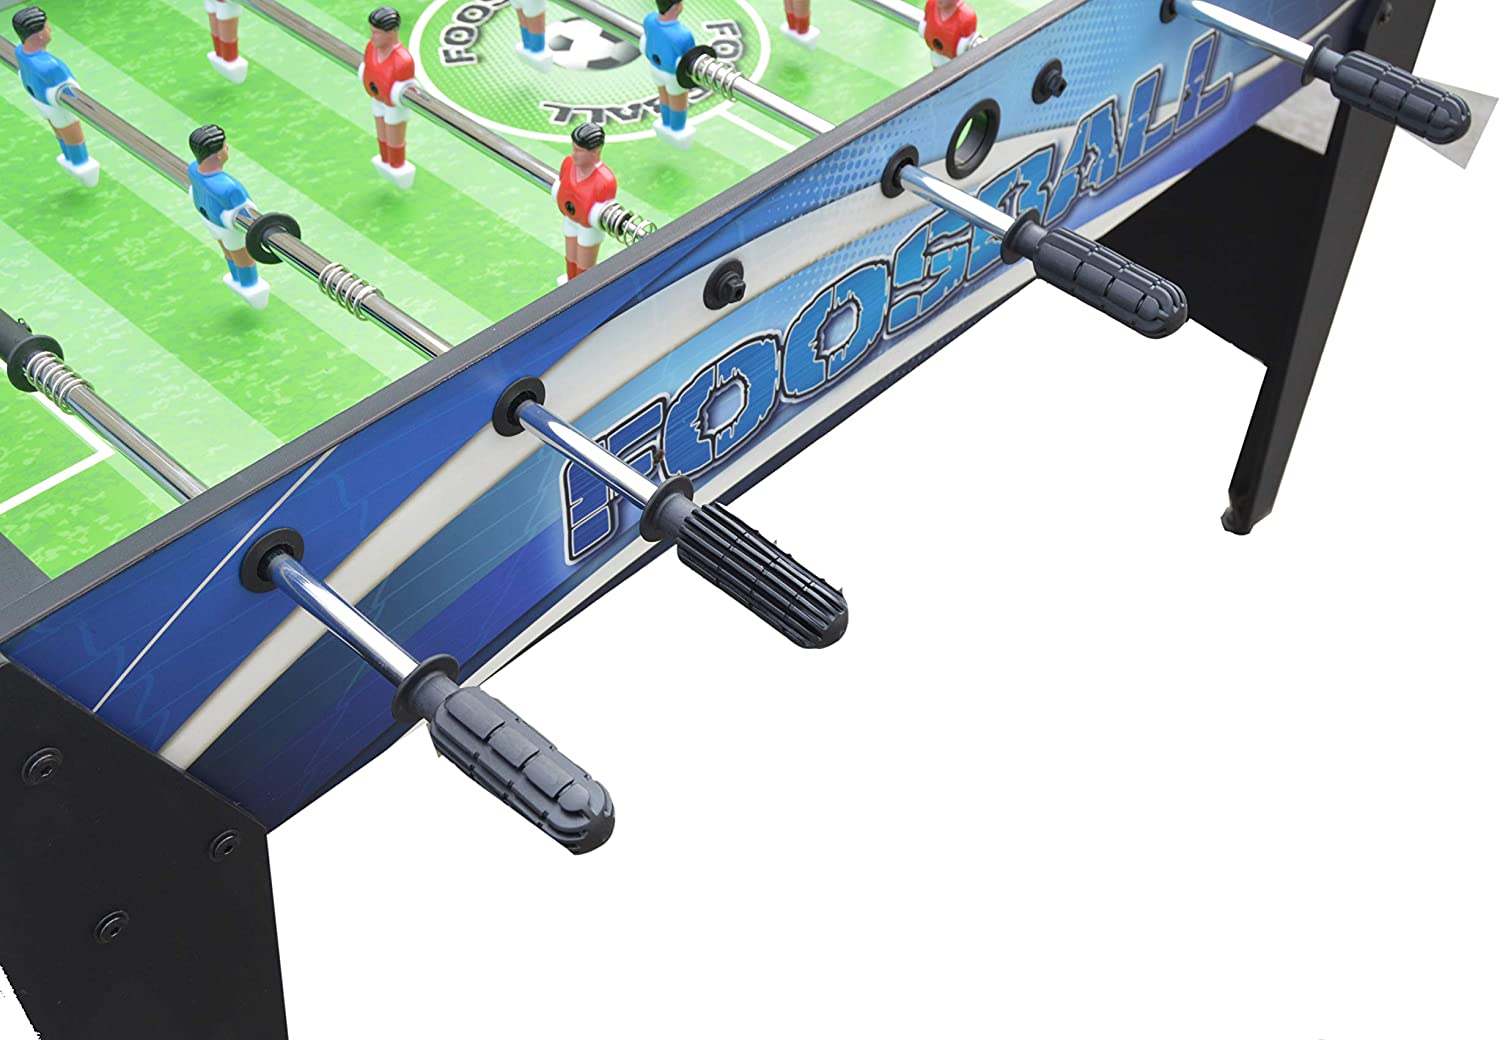 Hathaway Allure 48-in Foosball Table, Arcade Table Soccer for Game Rooms, Includes (2) 32-mm ABS Foosballs